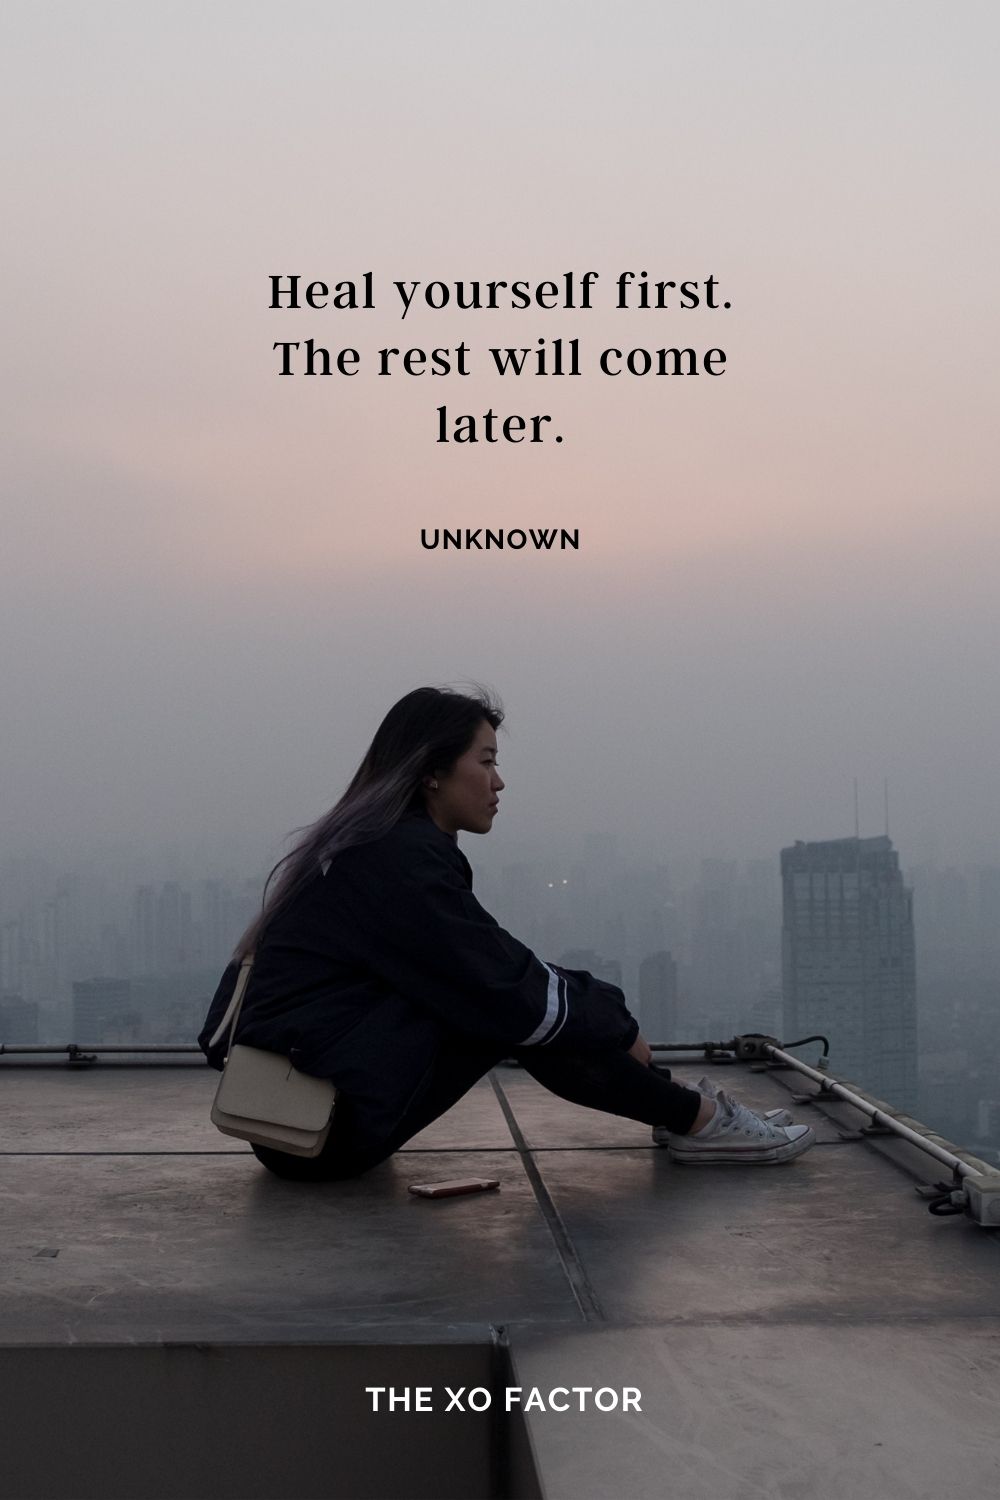 Heal yourself first. The rest will come later. Unknown